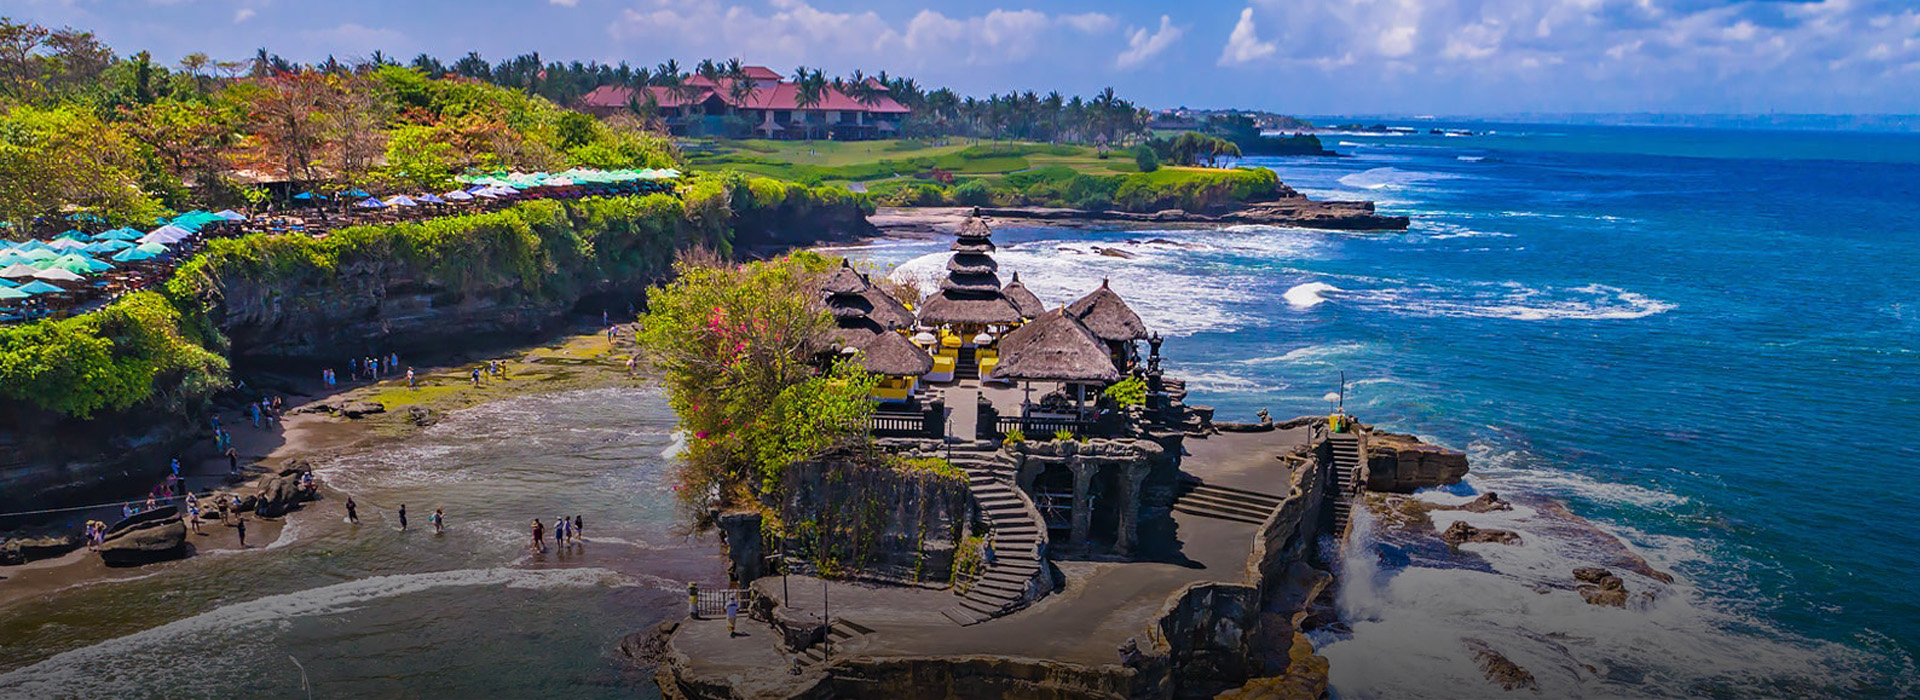 Bali Island Tour Packages